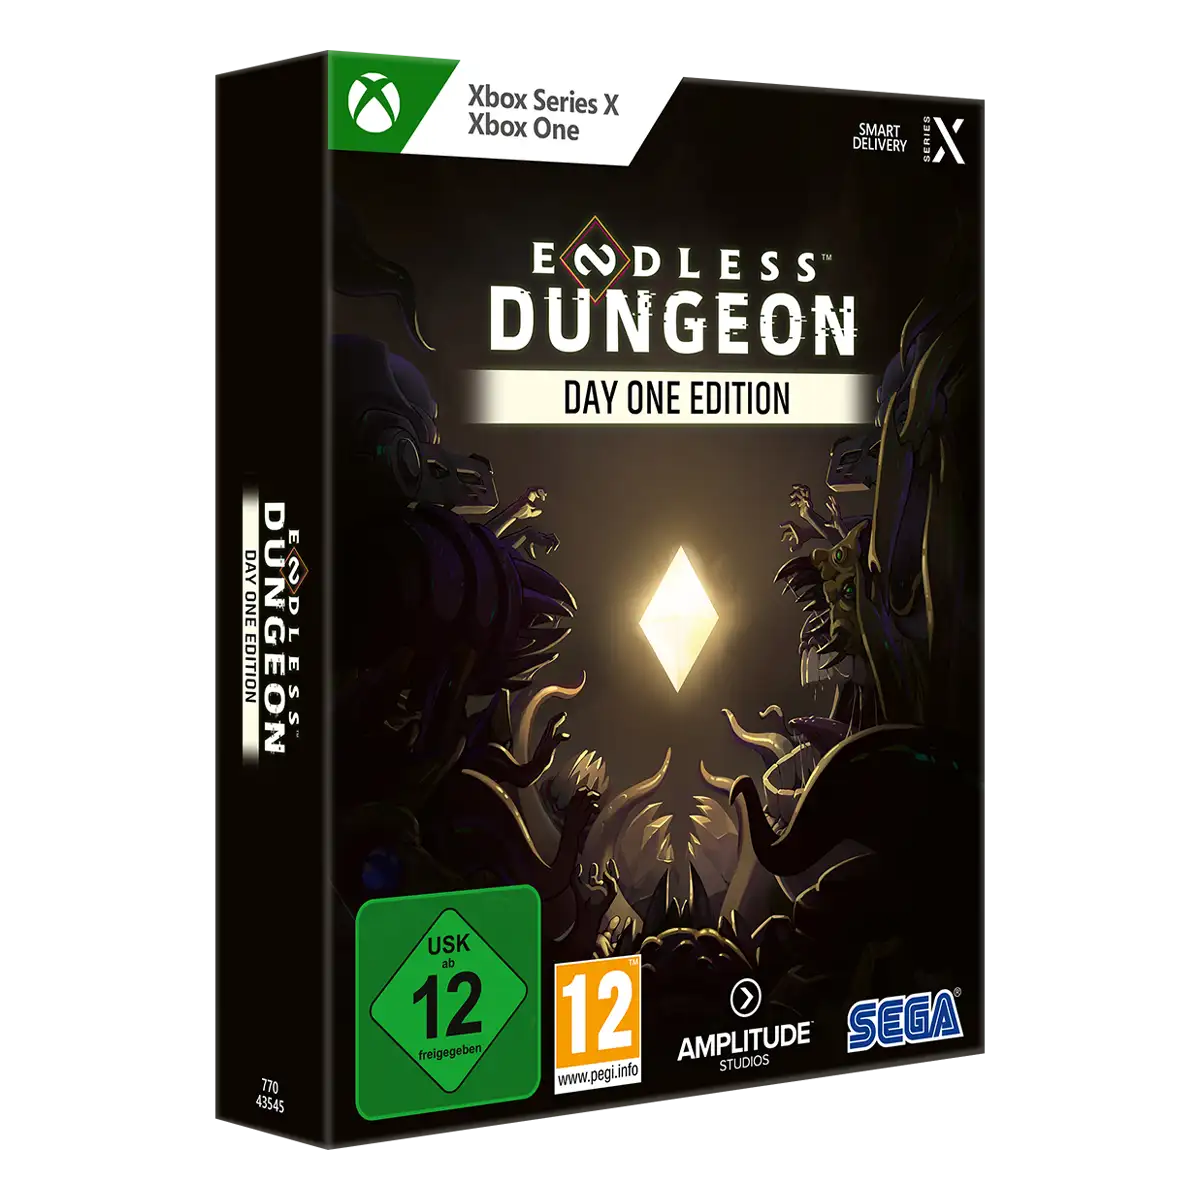 Endless Dungeon Day One Edition (Xbox One / Xbox Series X) Image 2